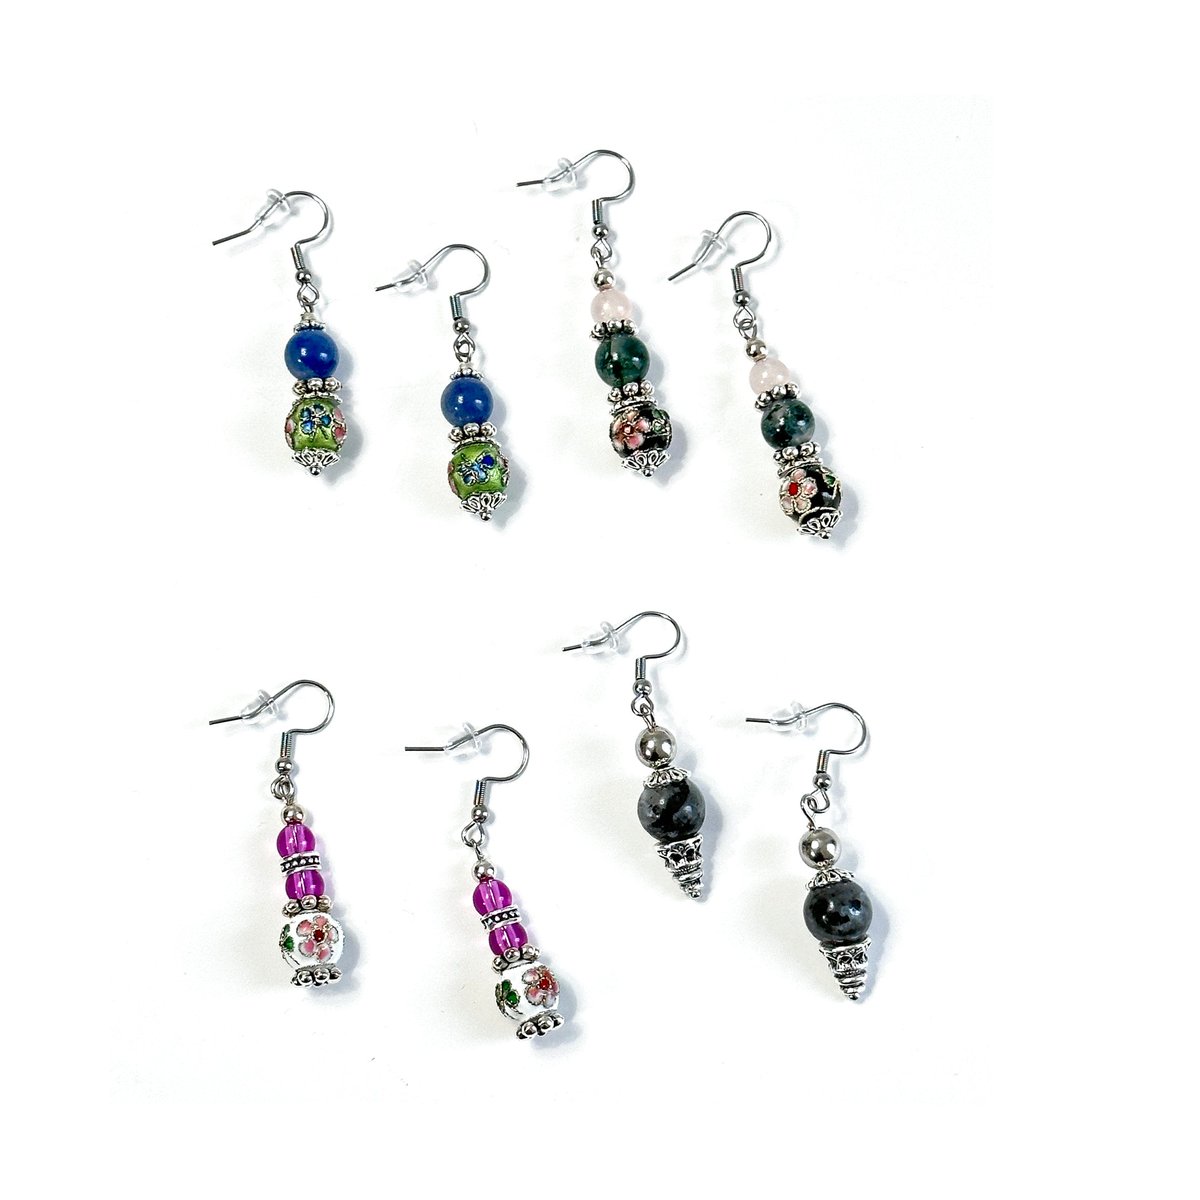 Drop Earrings with French Hook Stainless Steel Ear Wires and Silicone Backs Choose from Jade Moss, Agate, Larvikite, Quartz and Cloisonné #DangleDrops #GemstoneEarrings 
Buy here etsy.com/listing/155673…